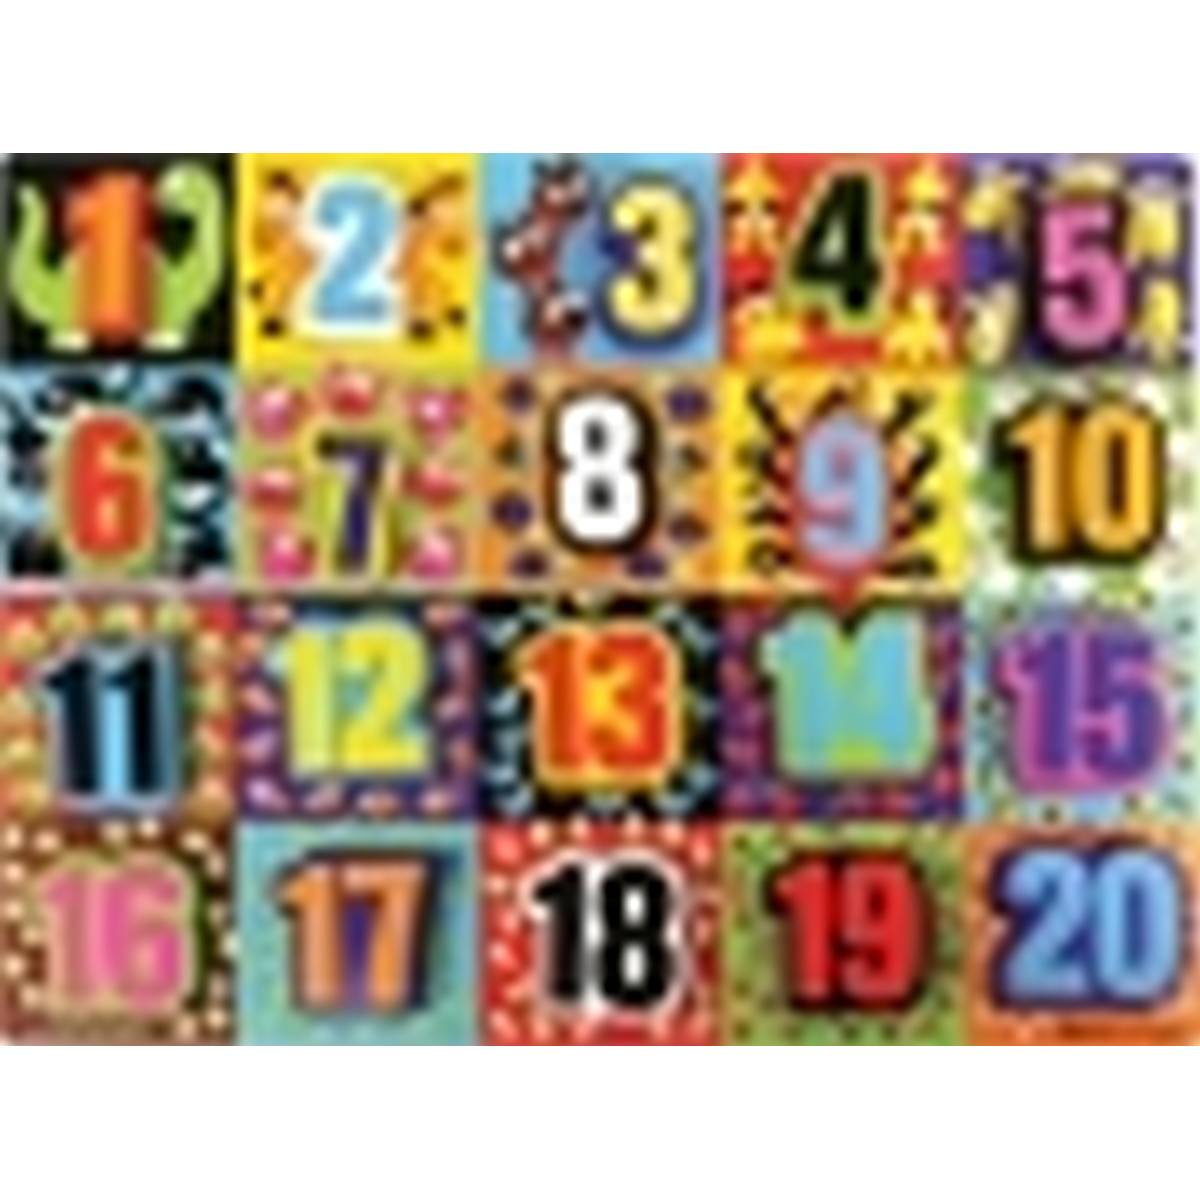 Jumbo Numbers Wooden Puzzle